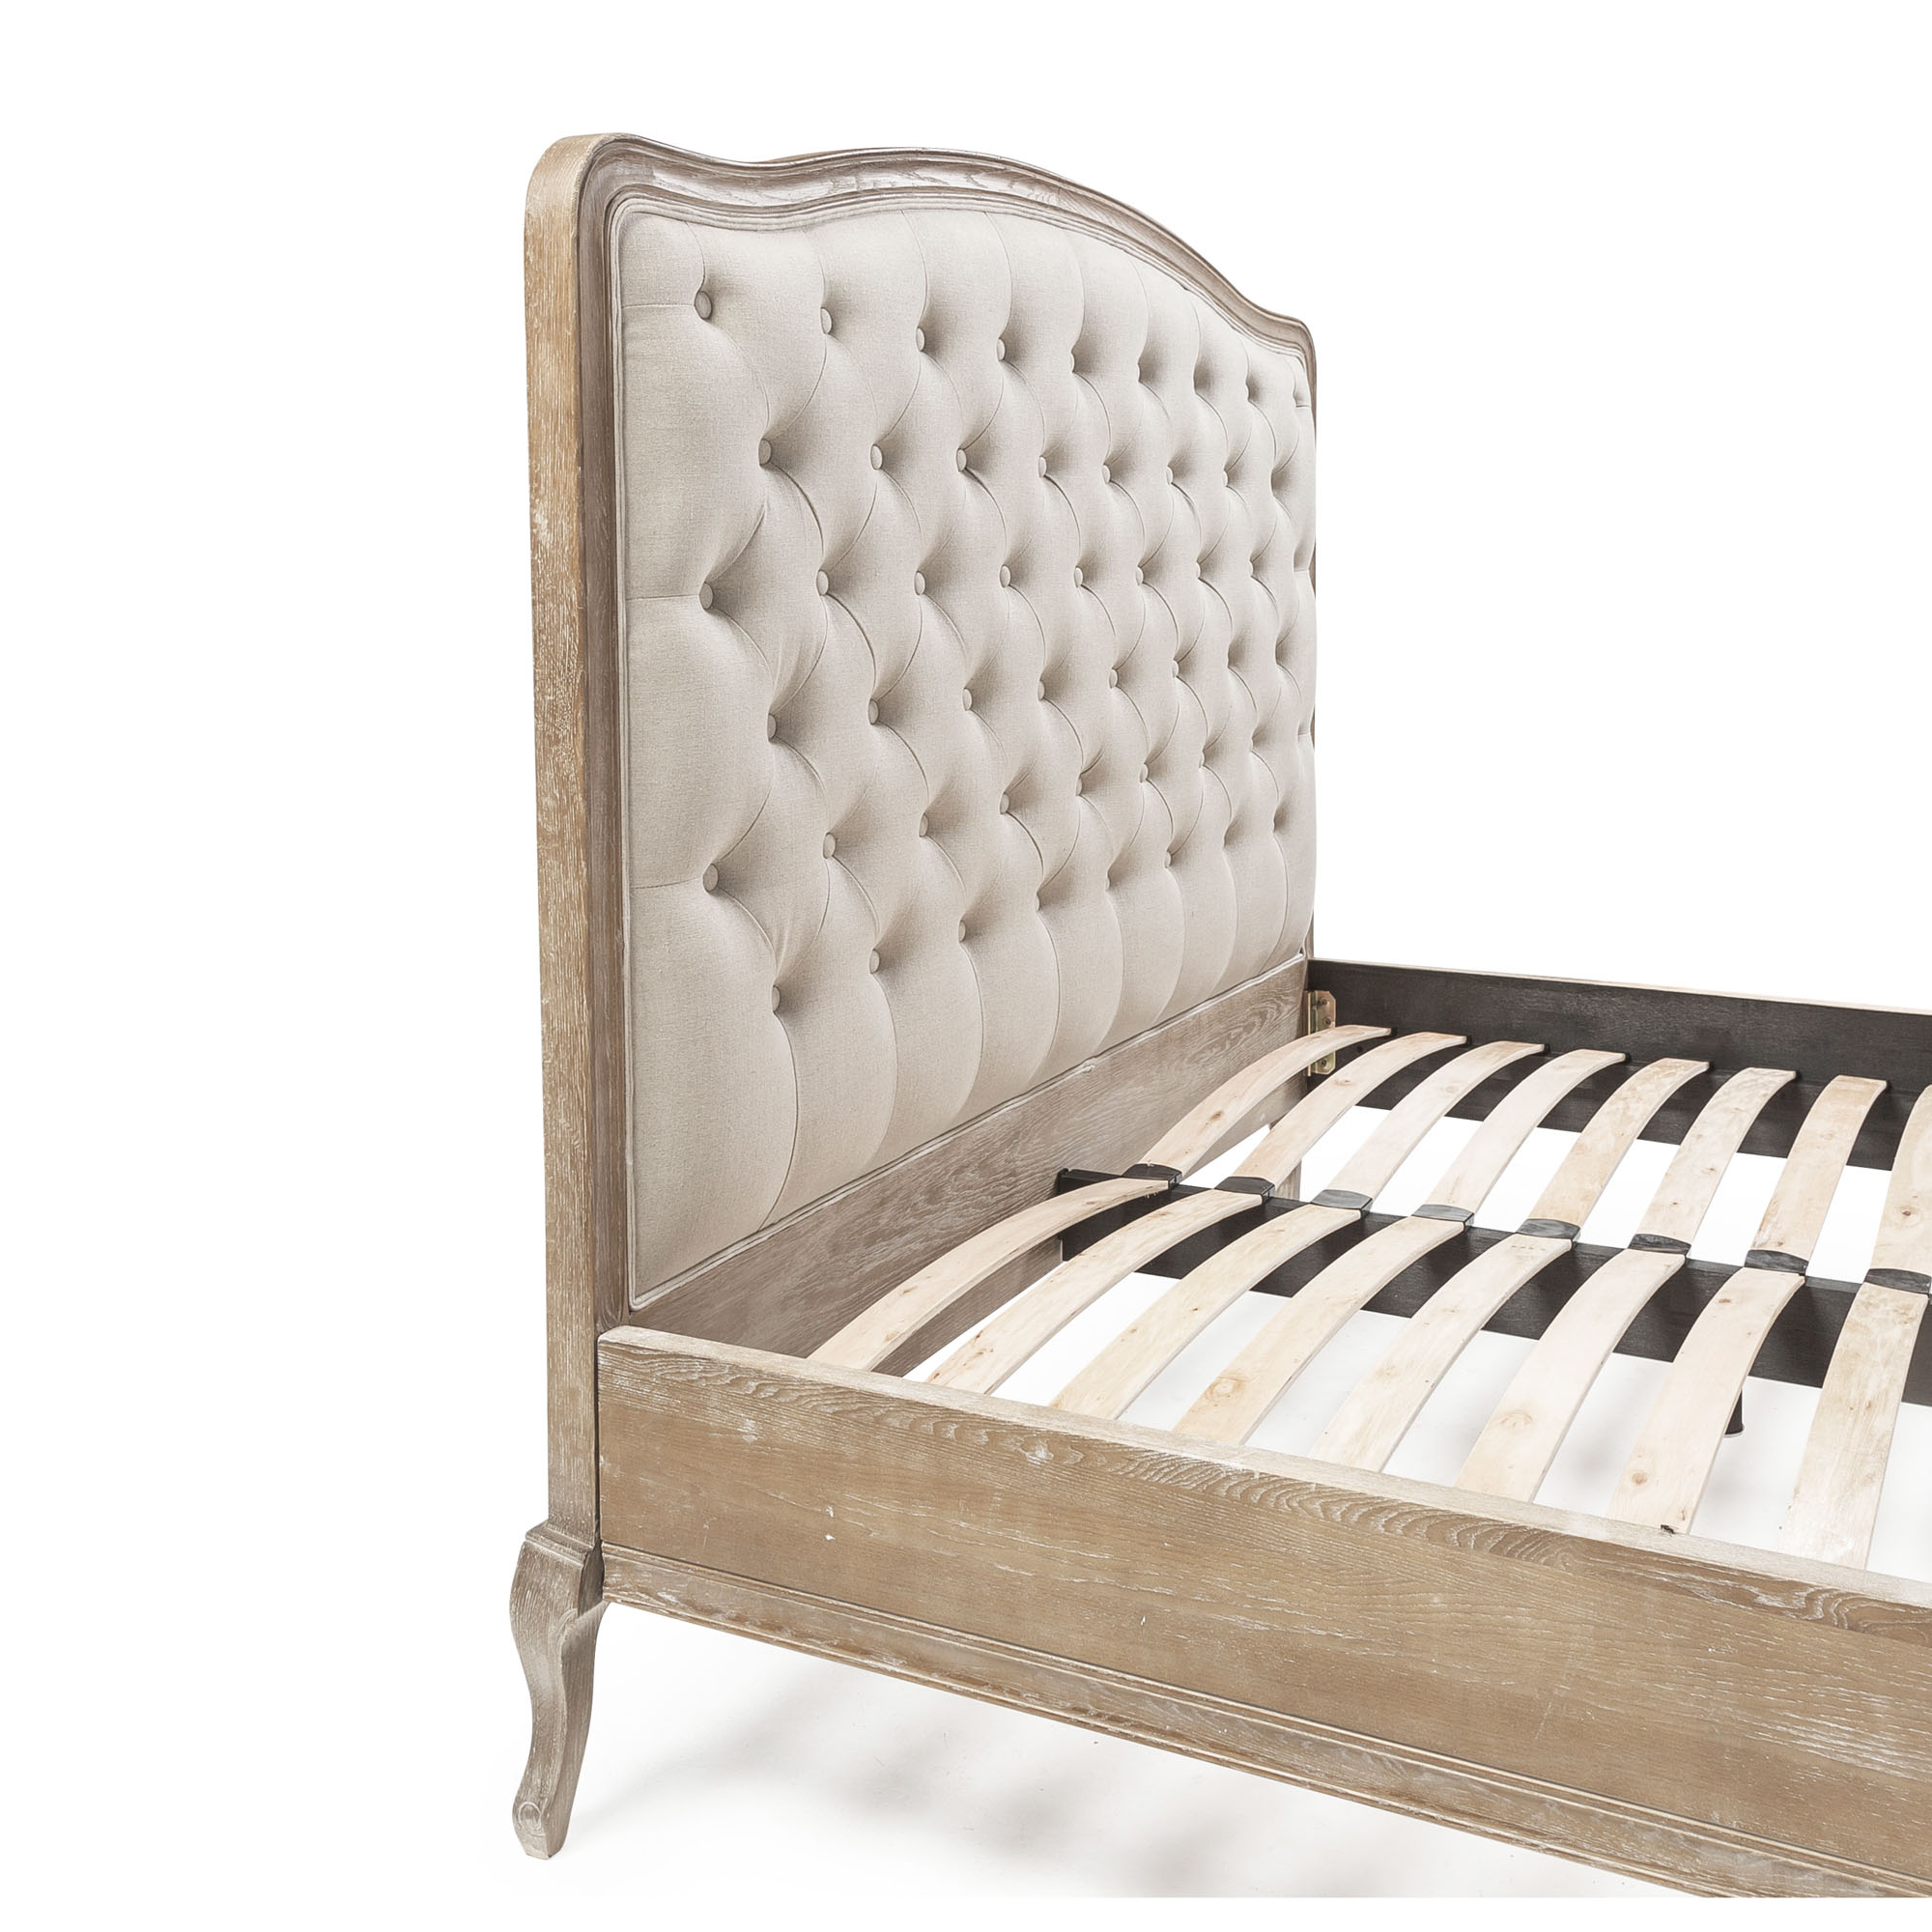 Arielle French Weathered Limed Ash Buttoned Upholstered High Foot Board Bed – King Size